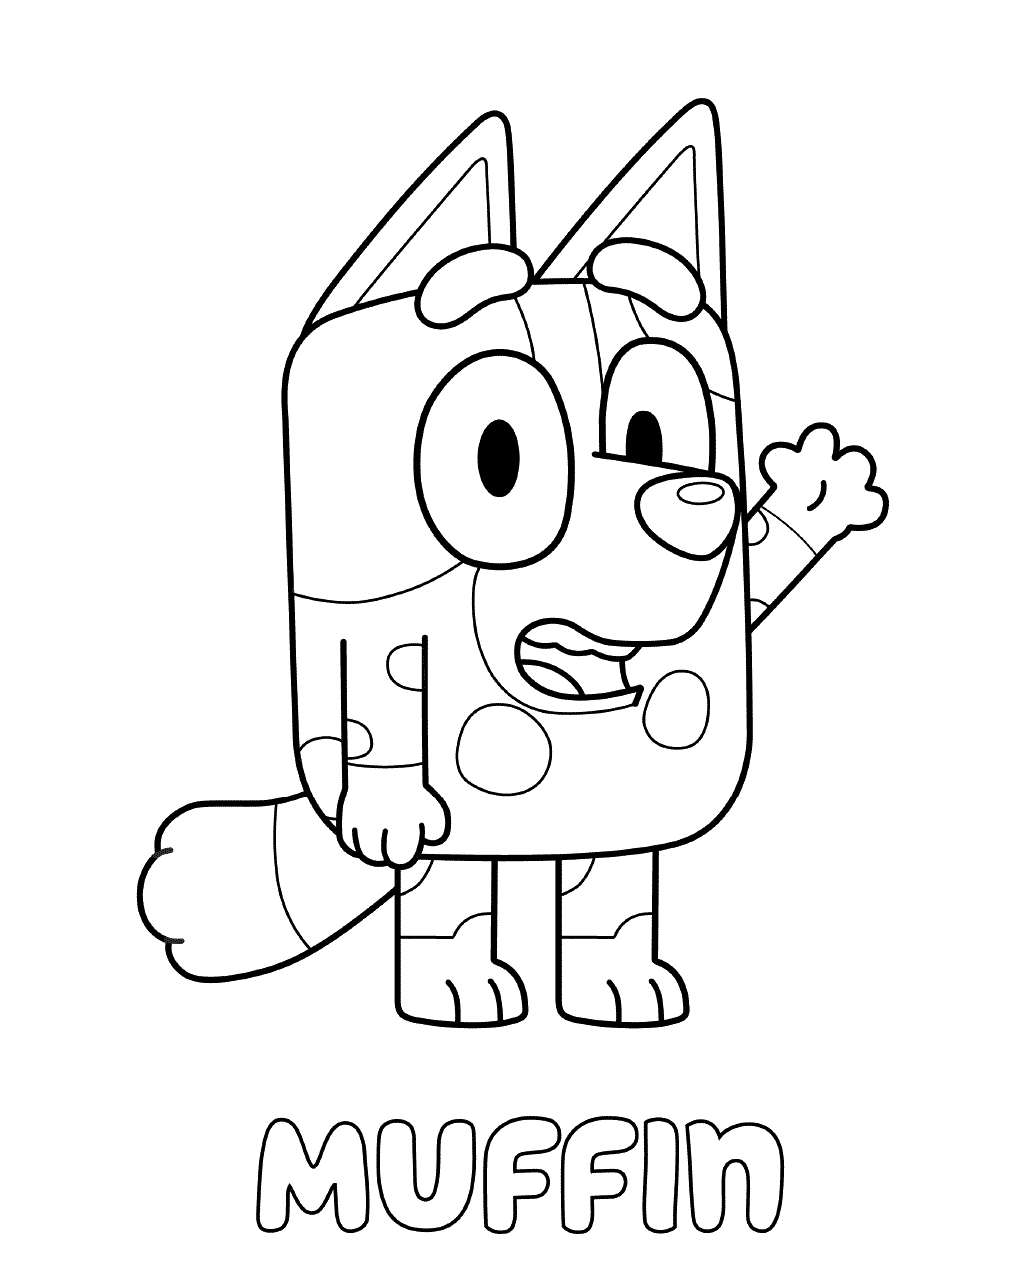 Muffin Blueys Coloring Pages   Coloring Cool